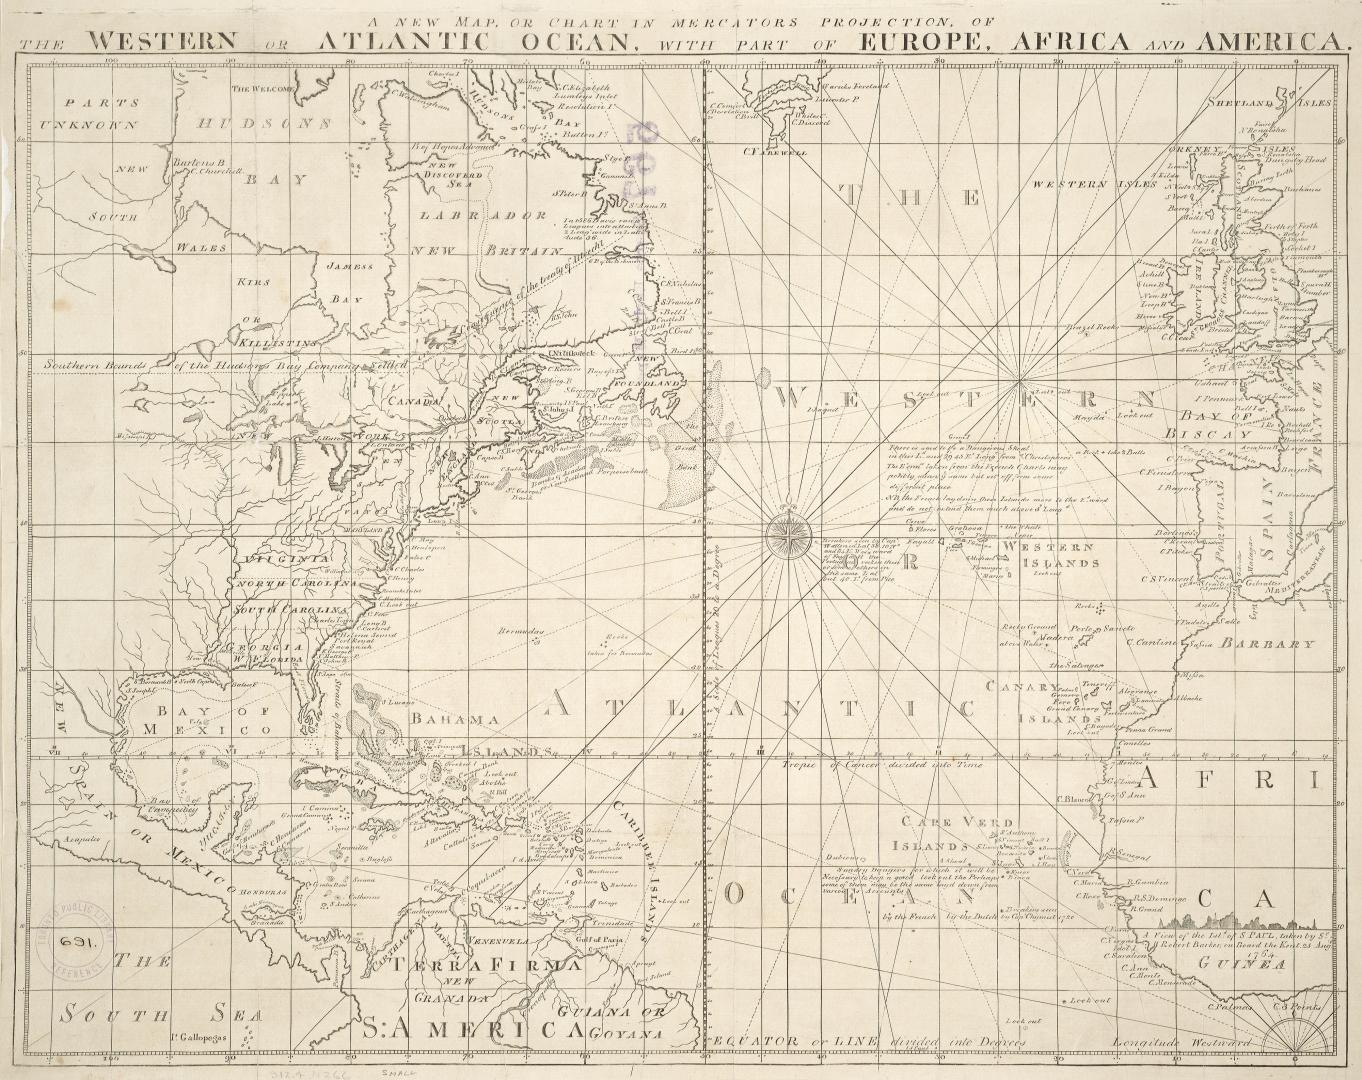 A new map or chart in Mercators projection of the Western or Atlantic Ocean, with part of Europe, Africa and America